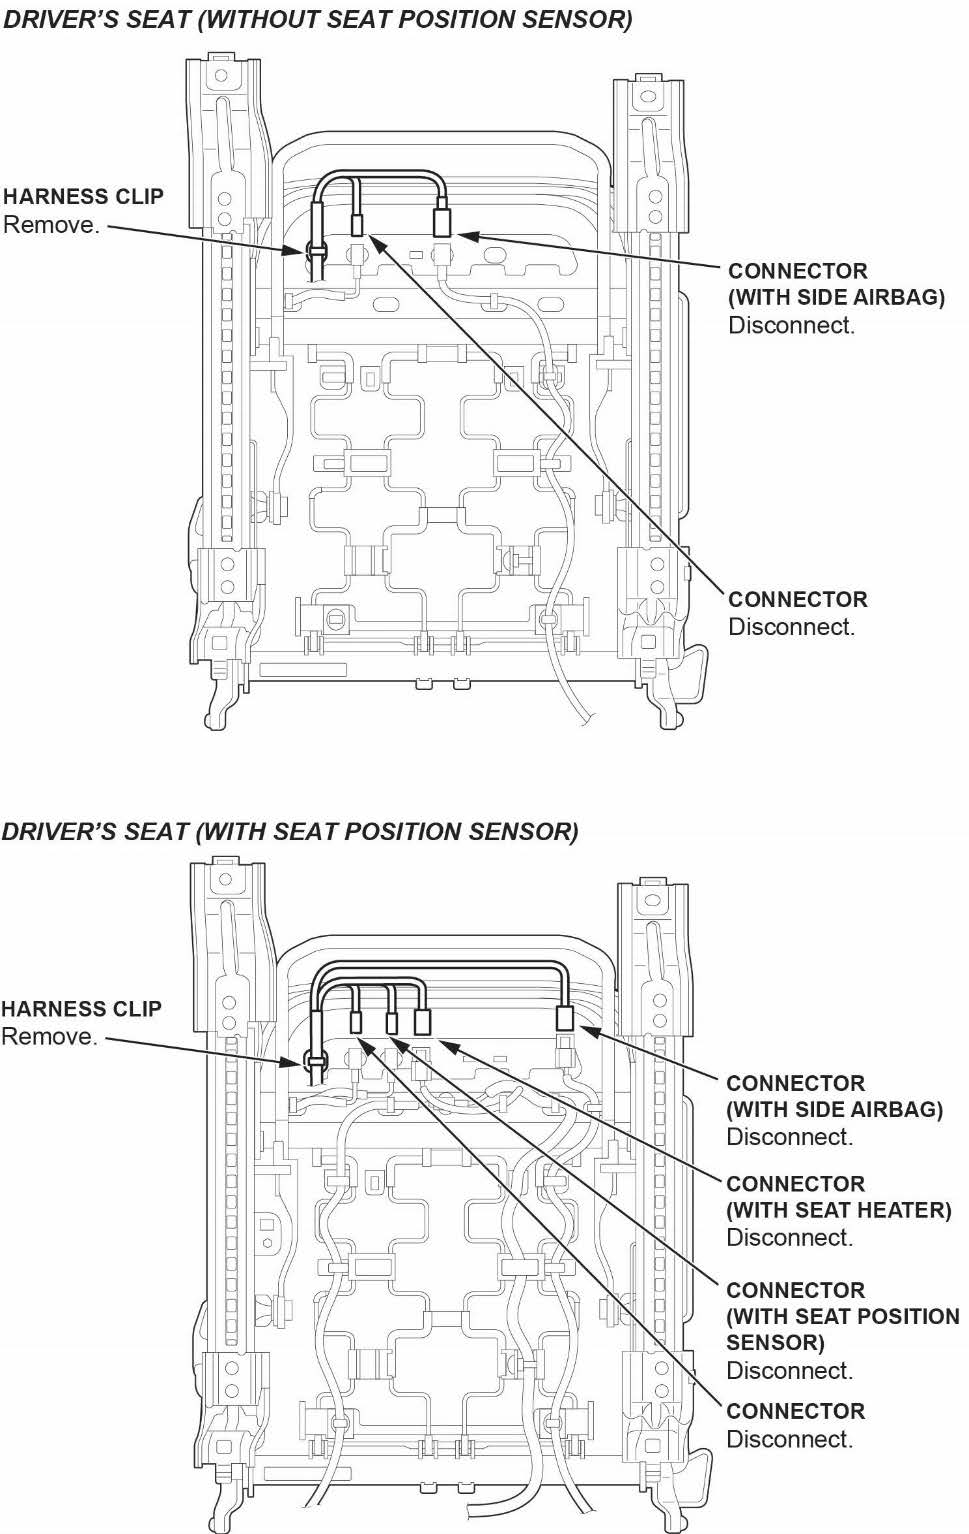 harness clip and connectors